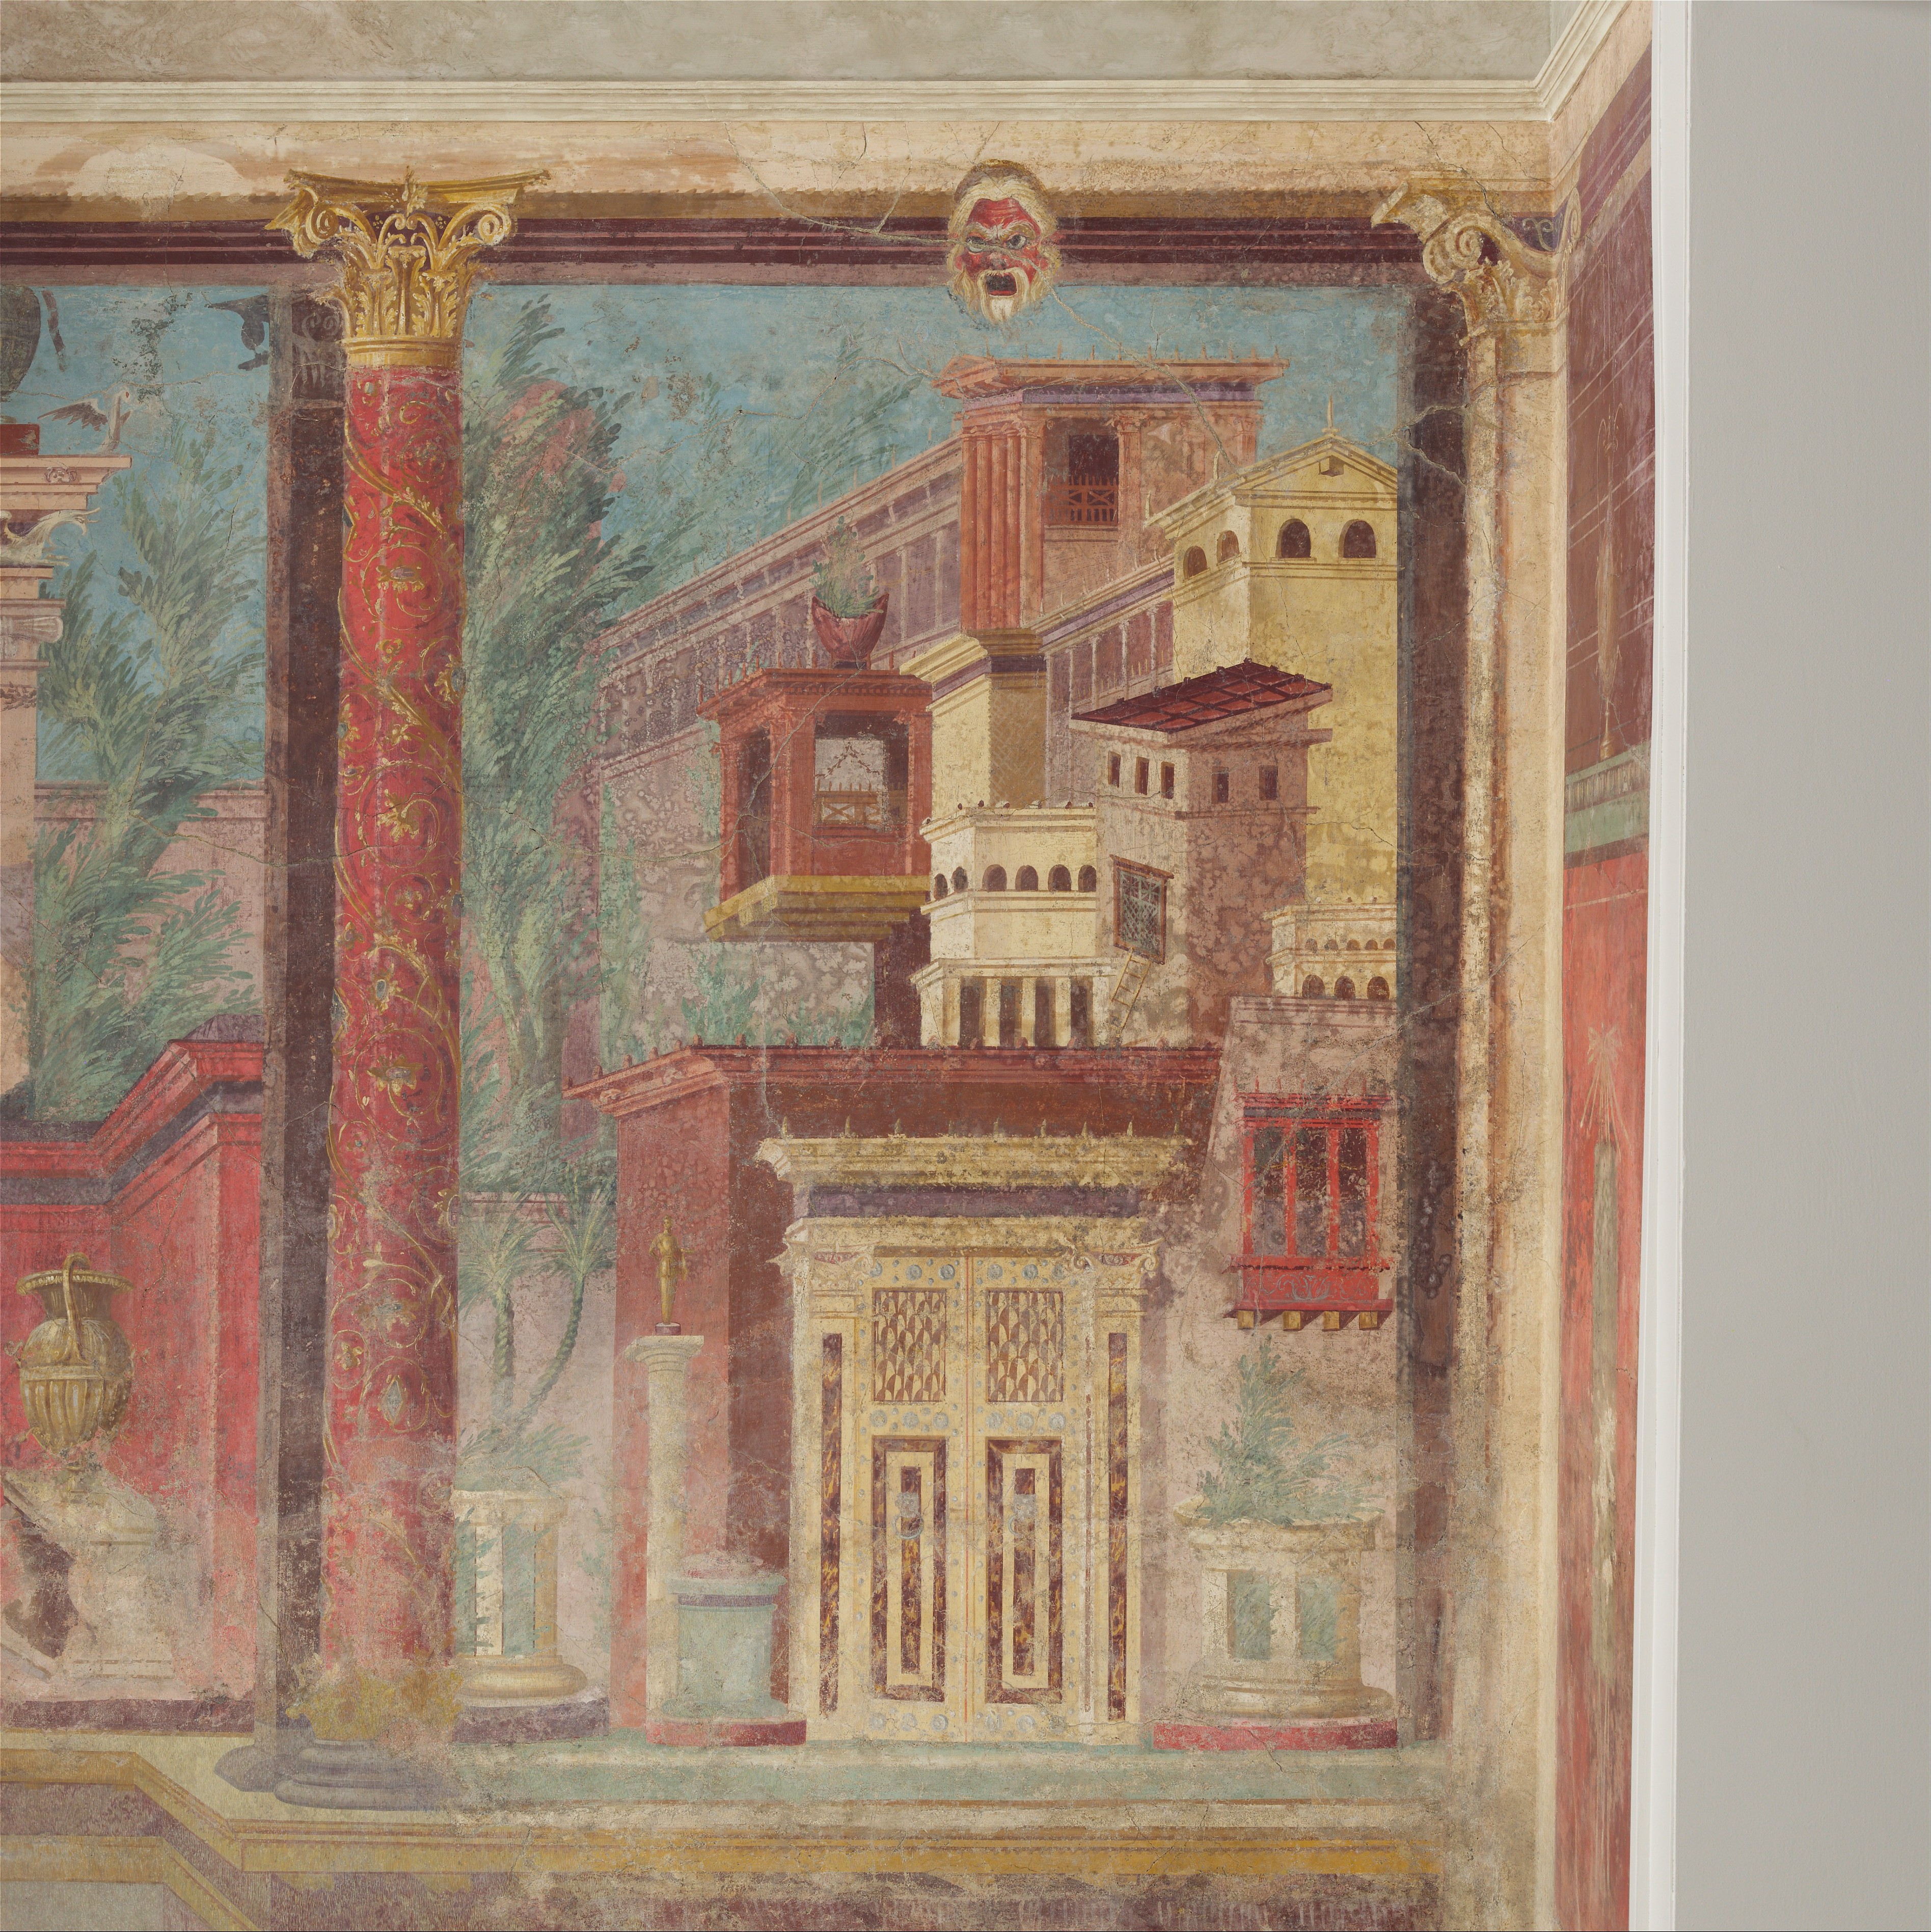 Cubiculum (bedroom) from the Villa of P. Fannius Synistor at Boscoreale: Wall painting of a villa, there is a red column painted on the left and various rectangular buildings on the right. 